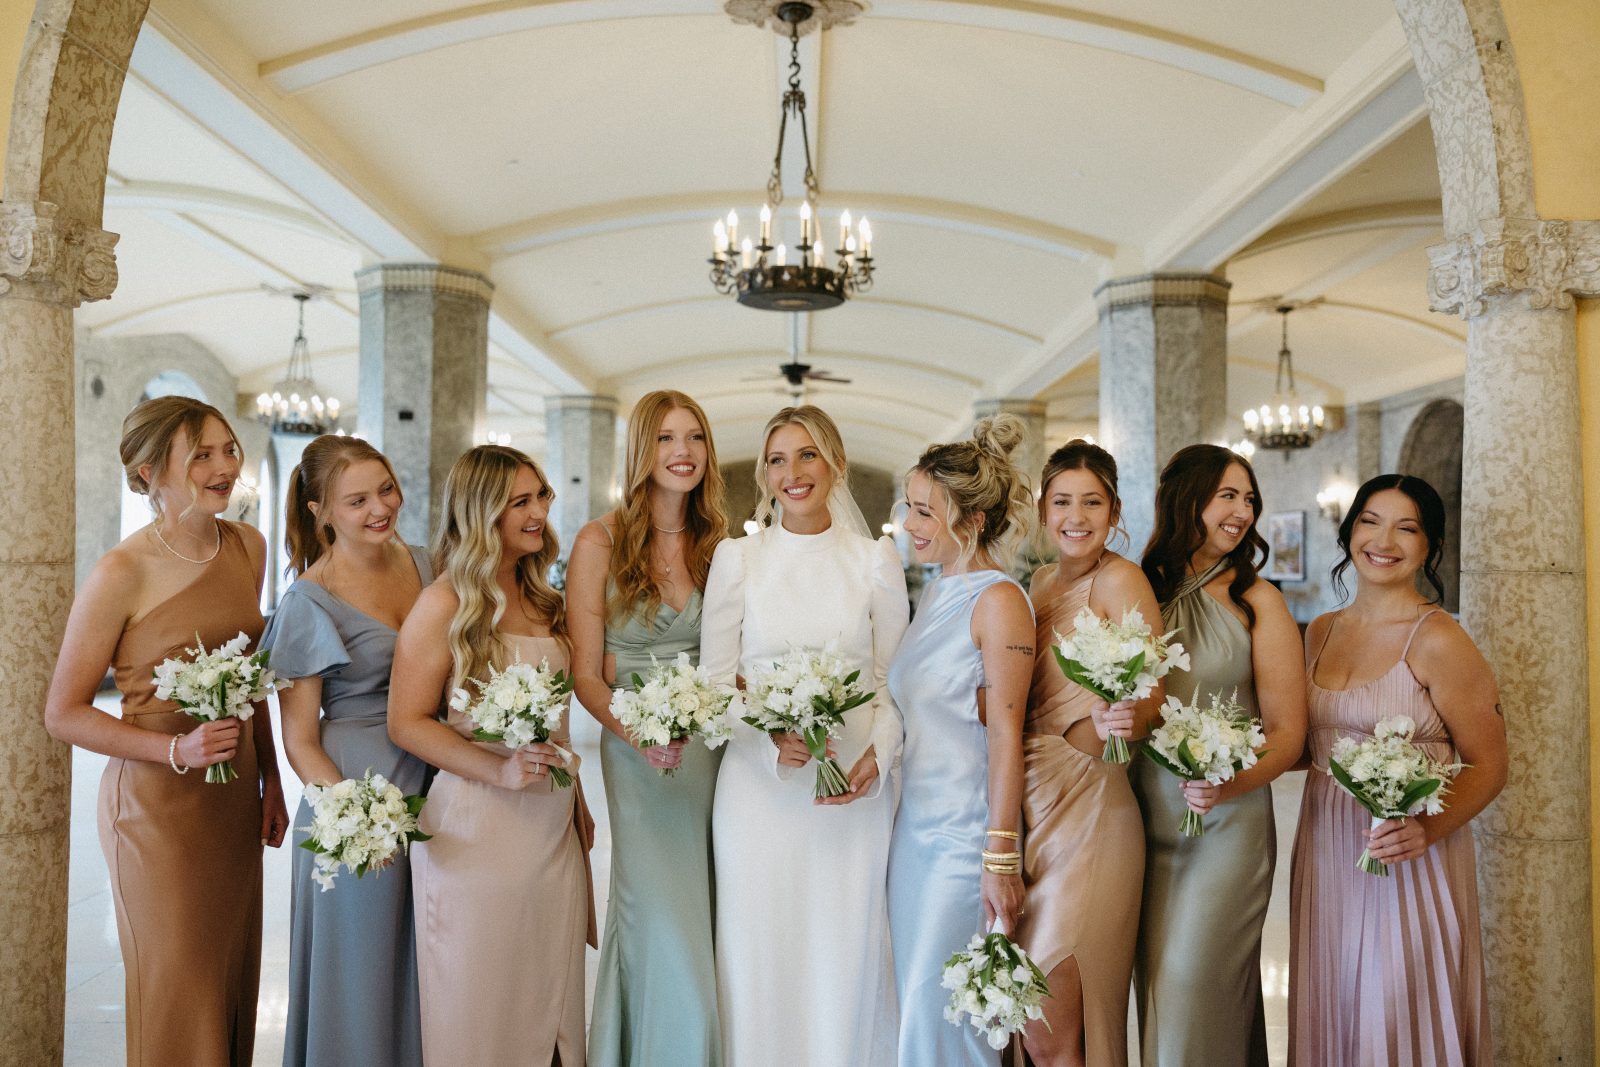 A Calyx bride and her bridesmaids wearing muted pastels all holding white posy bouquets